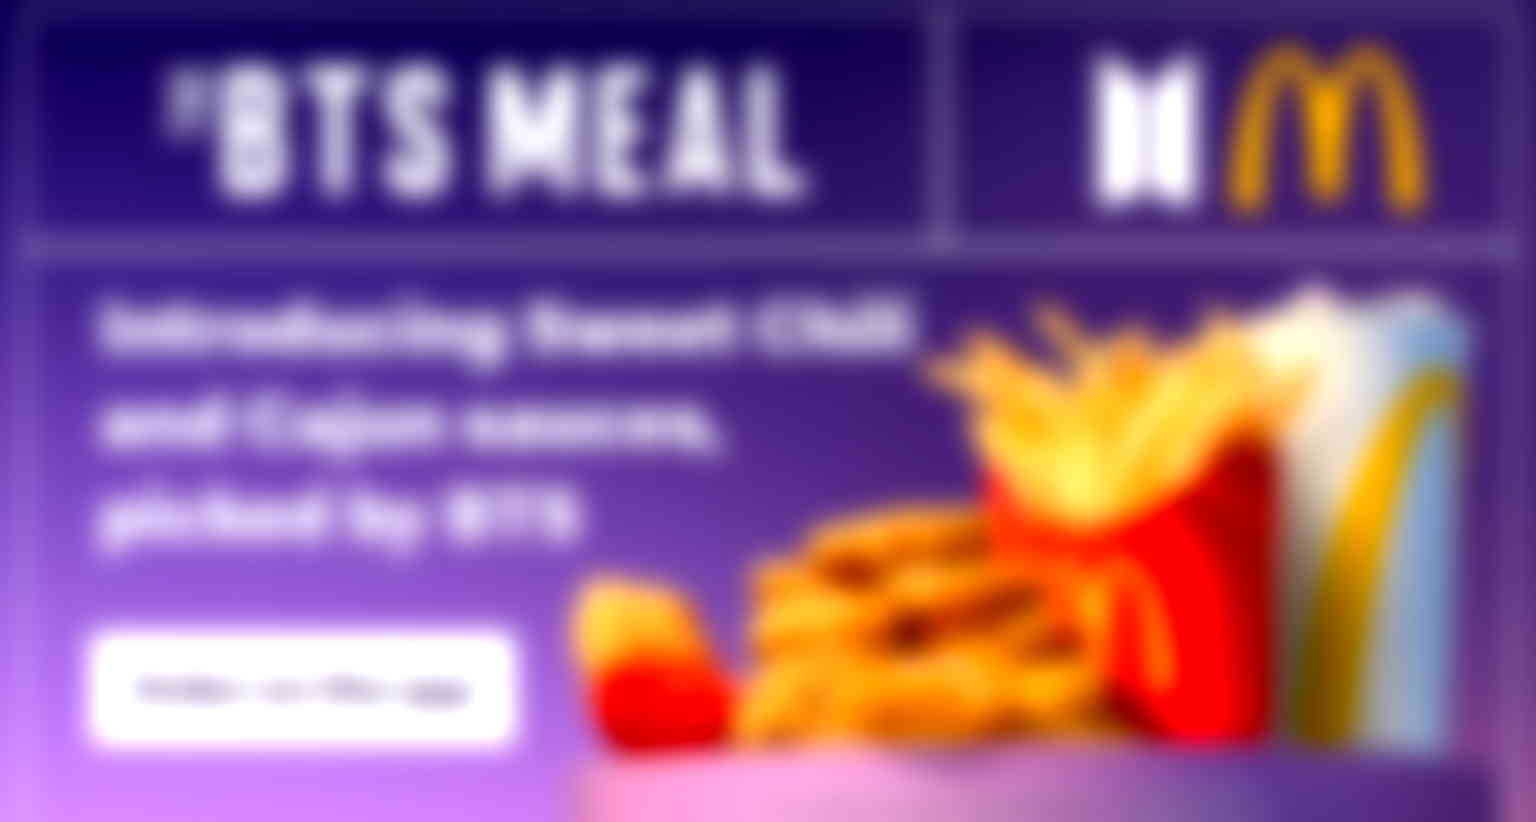 McDonald’s BTS Meal Officially Drops with Behind-The-Scenes on App